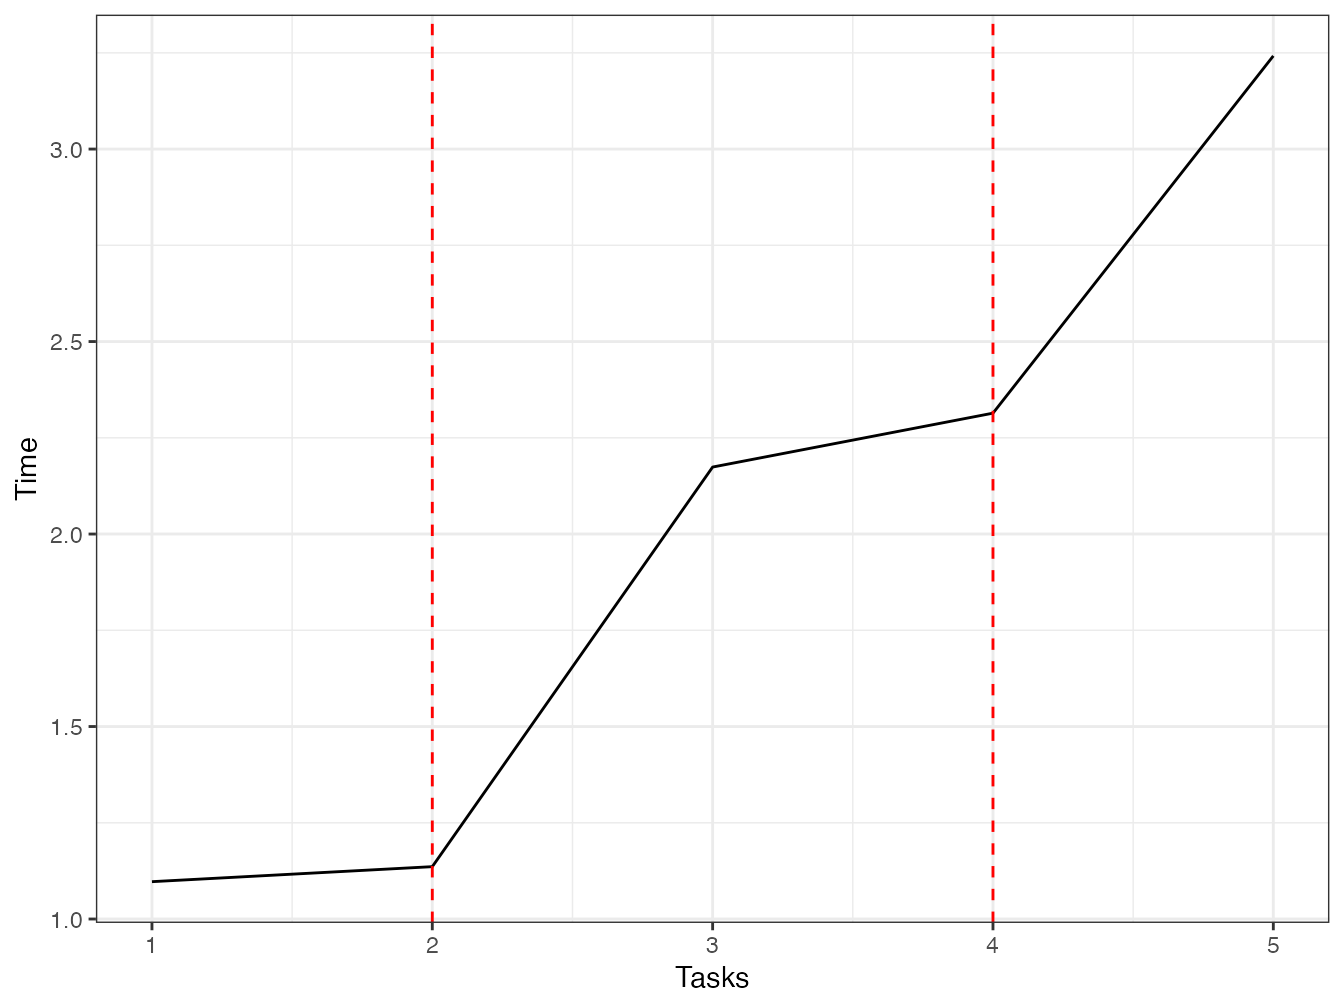 Parallel execution time of tasks requiring one second (each task is a one second pause). The number of tasks varies from 1 to twice the number of cores used (equal to 3) plus one.